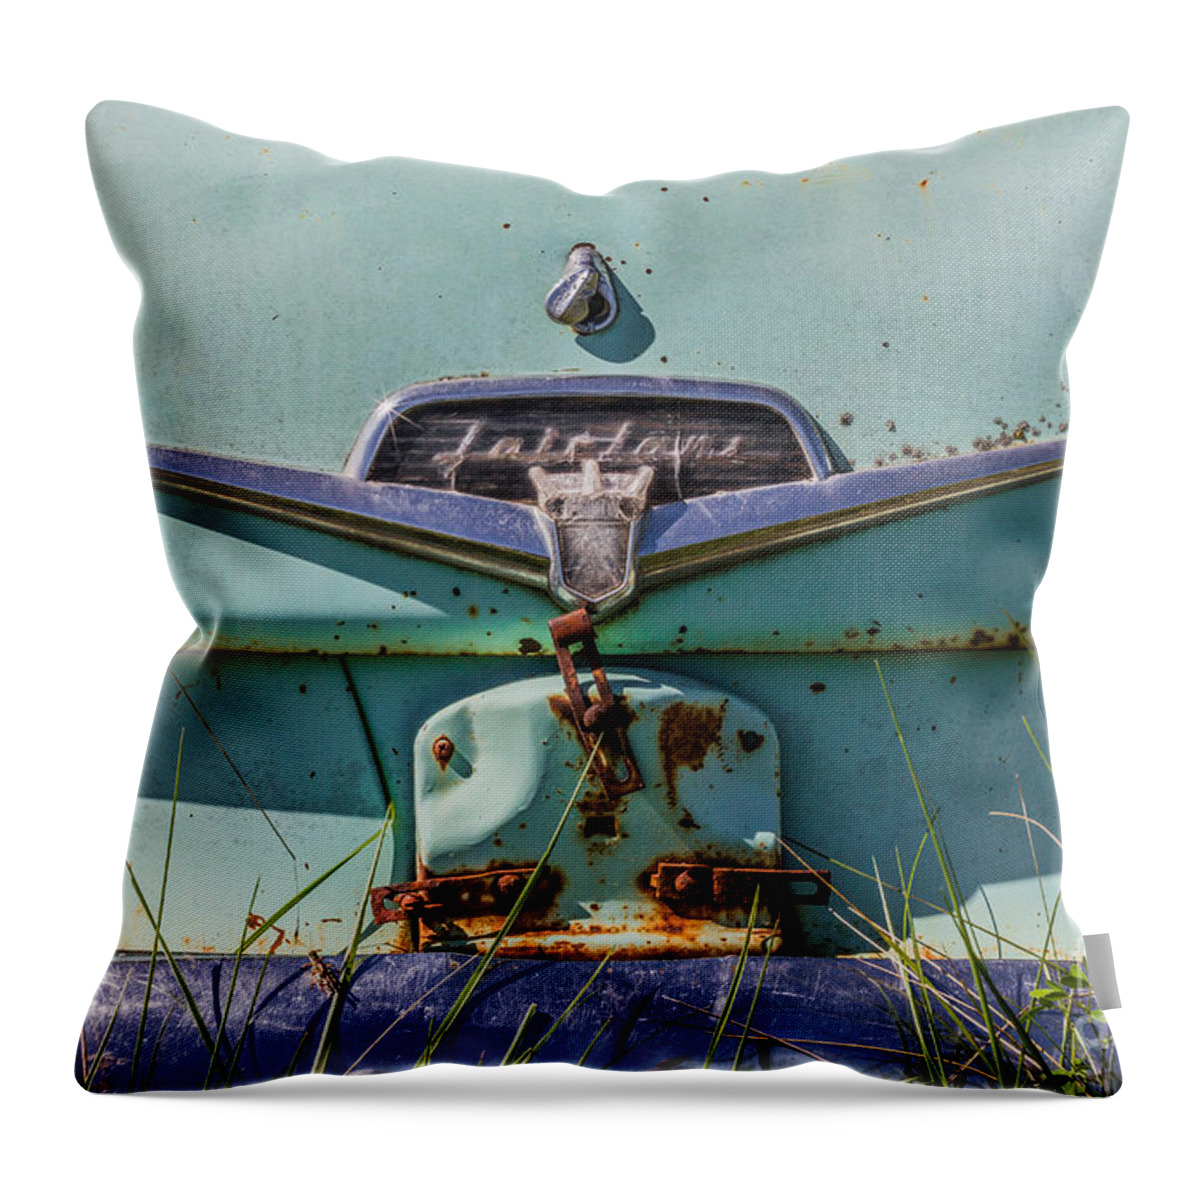 Fairlane Throw Pillow featuring the photograph Ford Fairlane by Ashley M Conger